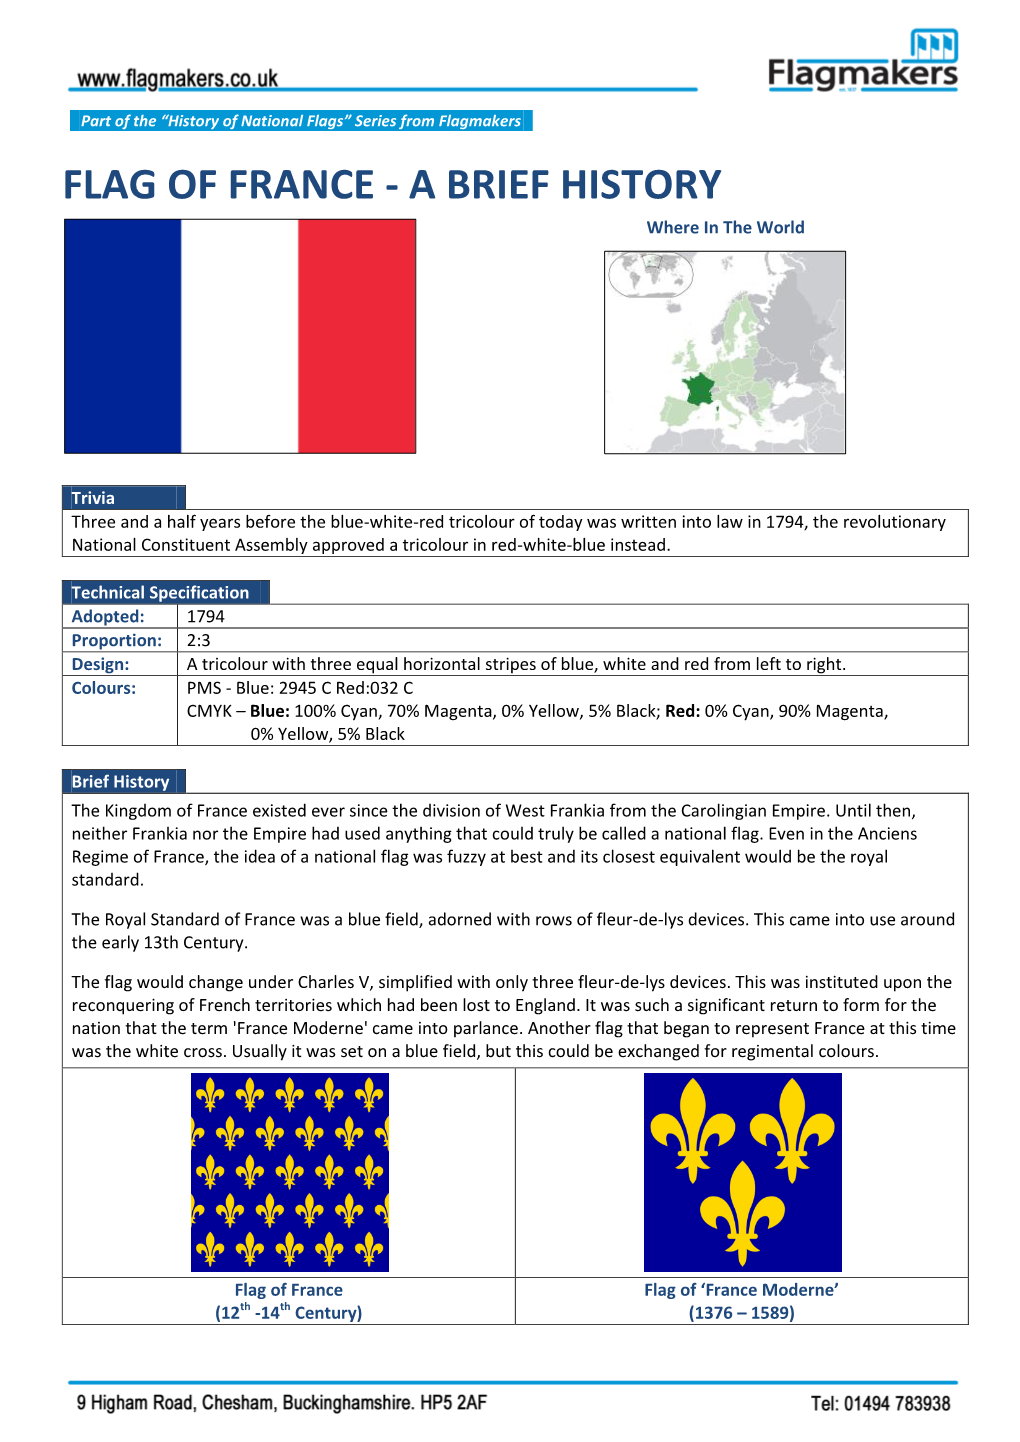 FLAG of FRANCE - a BRIEF HISTORY Where in the World